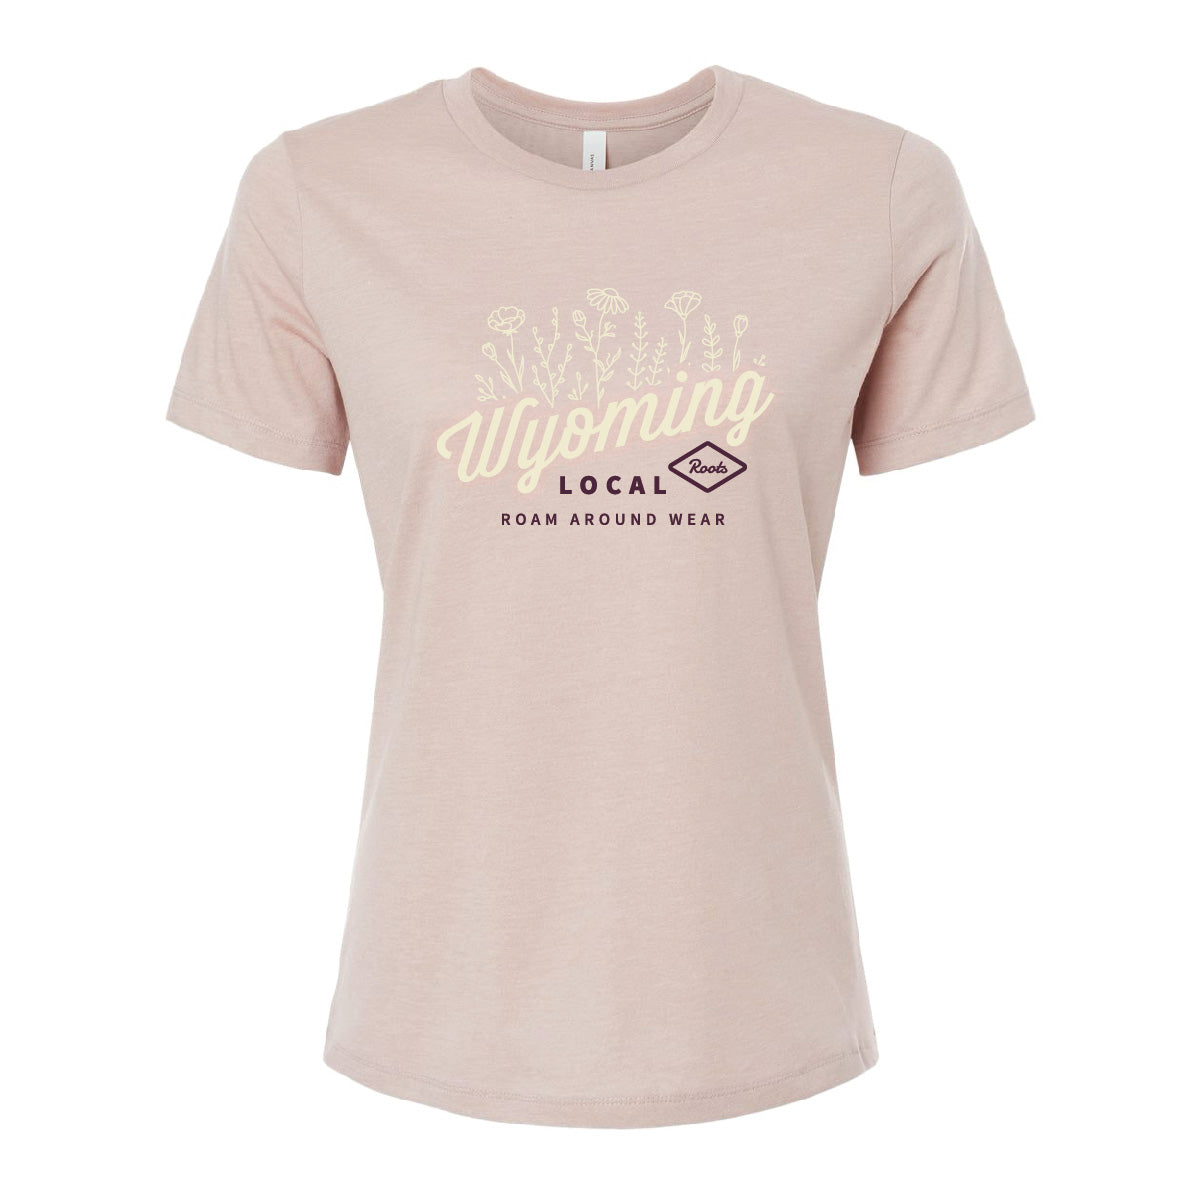 Spring tee. Wyoming floral tee. Wyoming t-shirt. Unisex tee. Women's pink tee with beige and eggplant floral. Roam Around Wear is a Wyoming t-shirt company based in Gillette, Wyoming